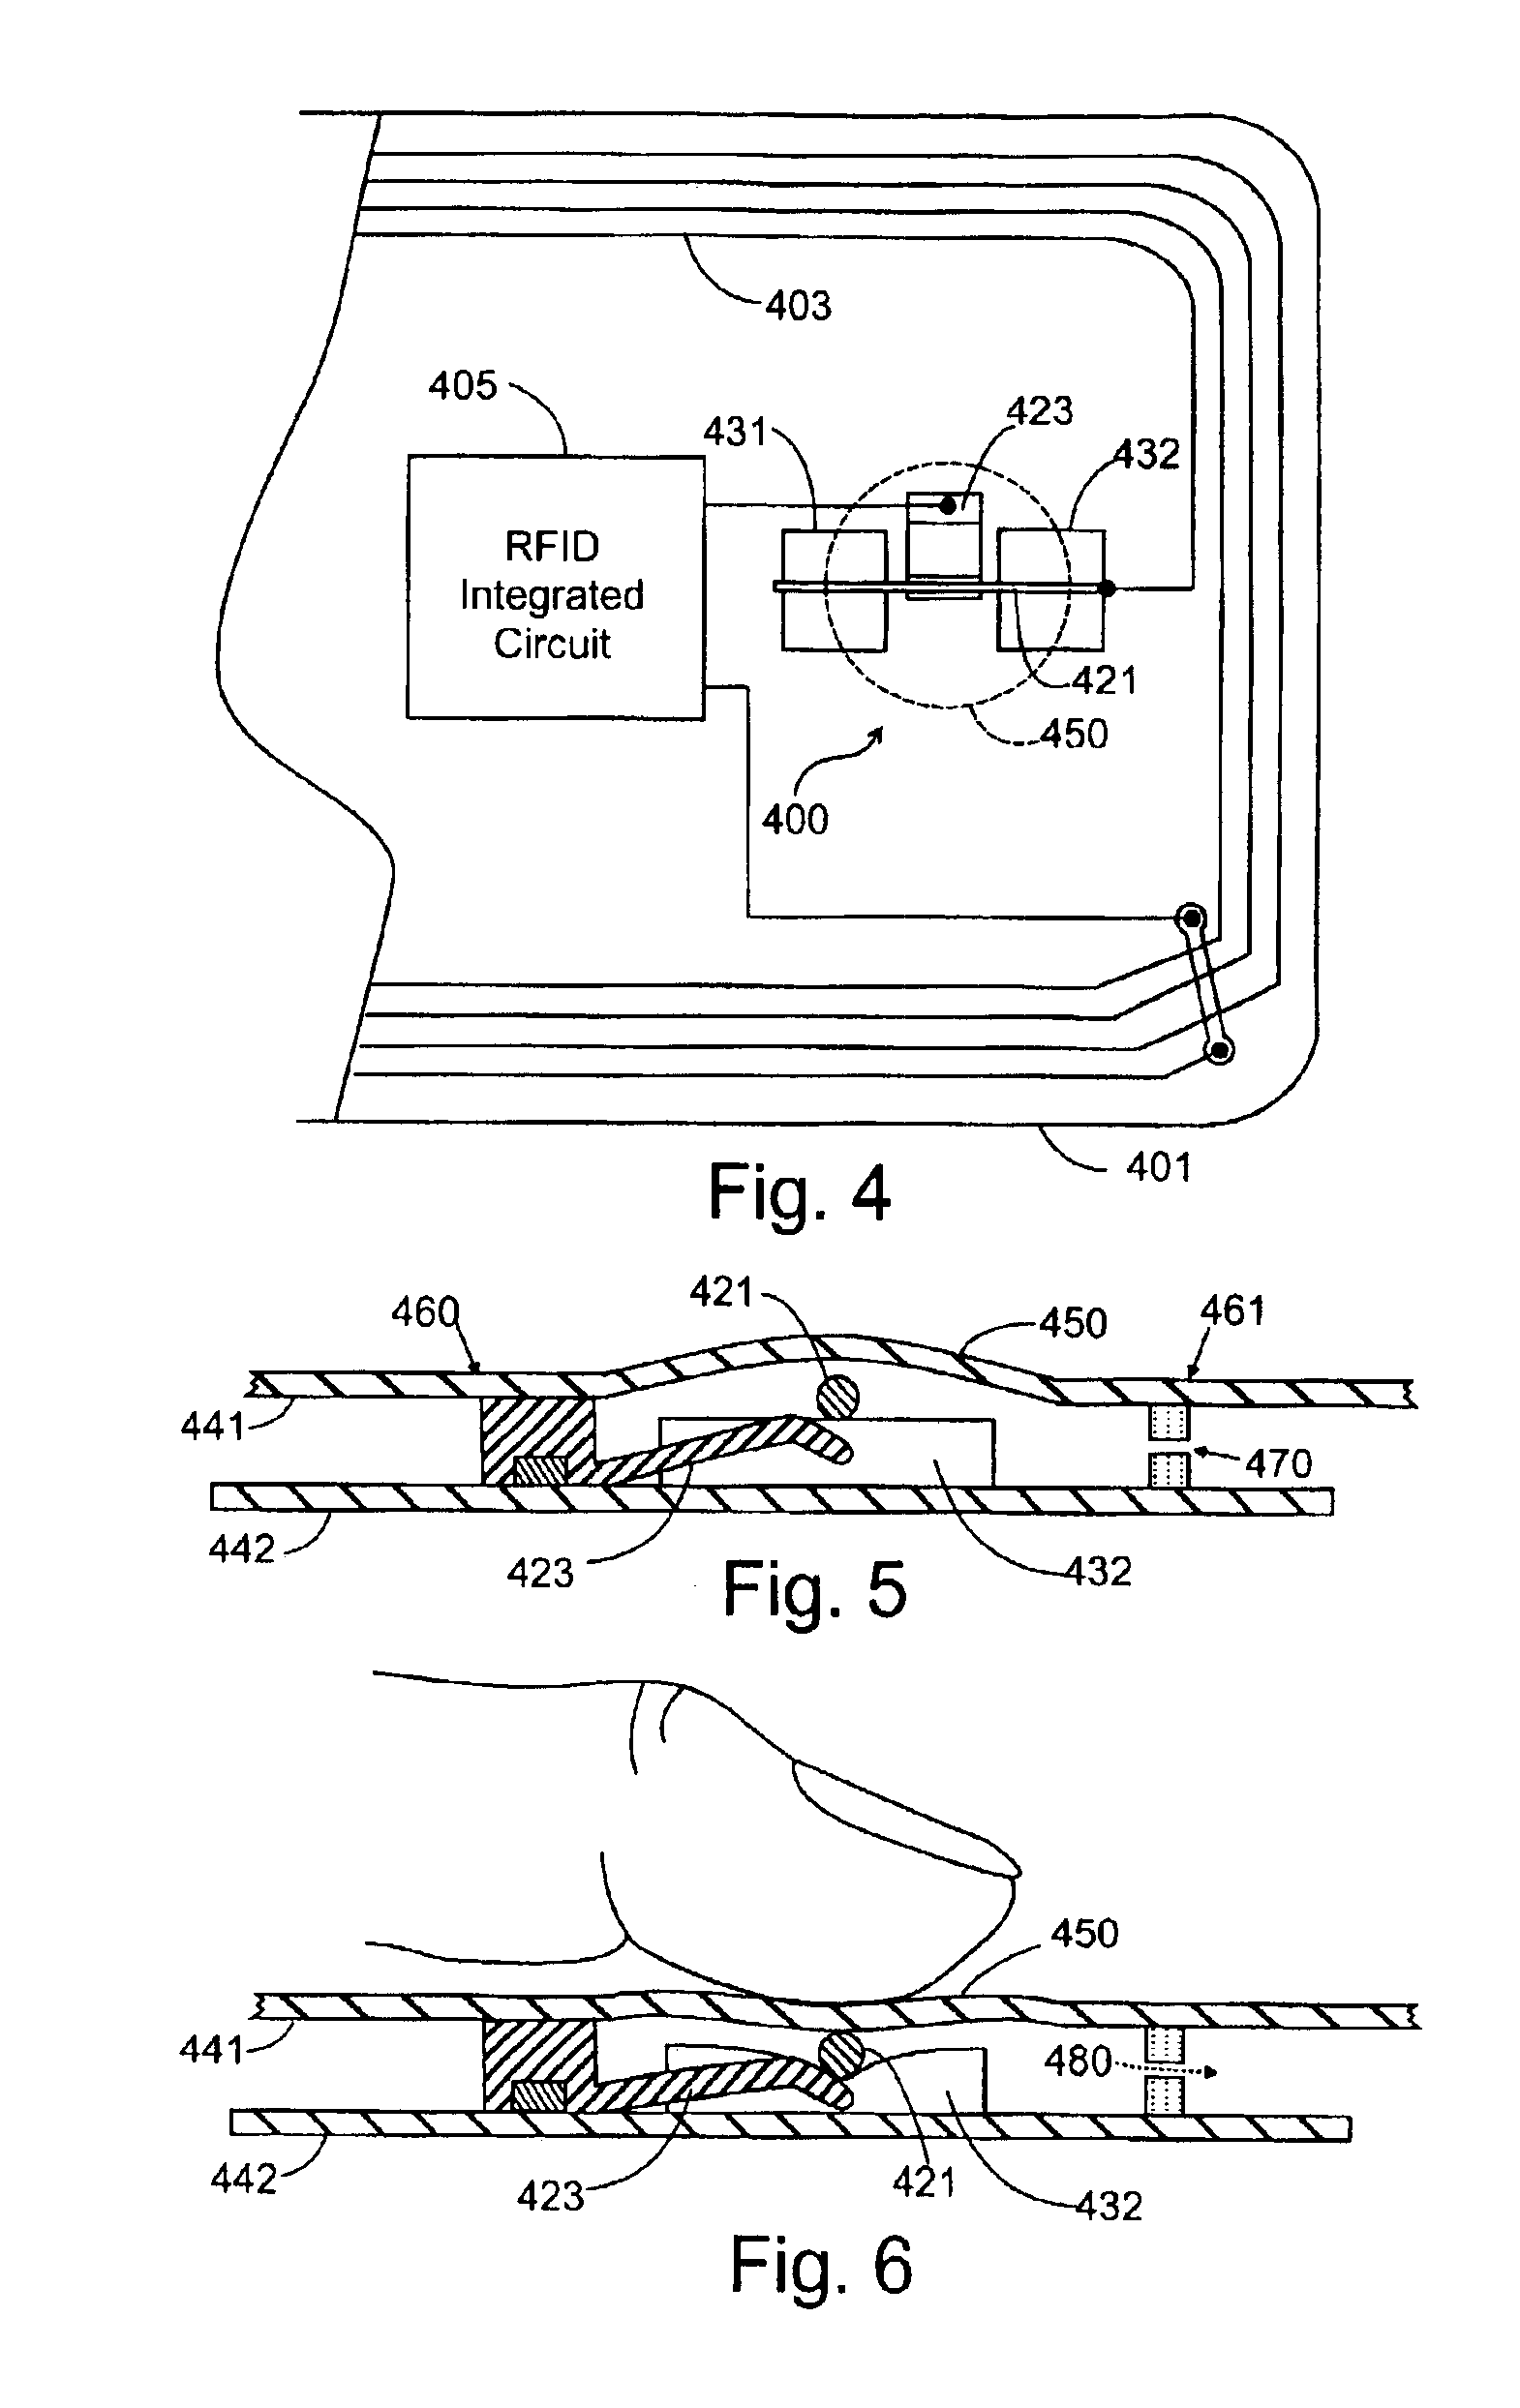 Manually operated switch for enabling and disabling an RFID card